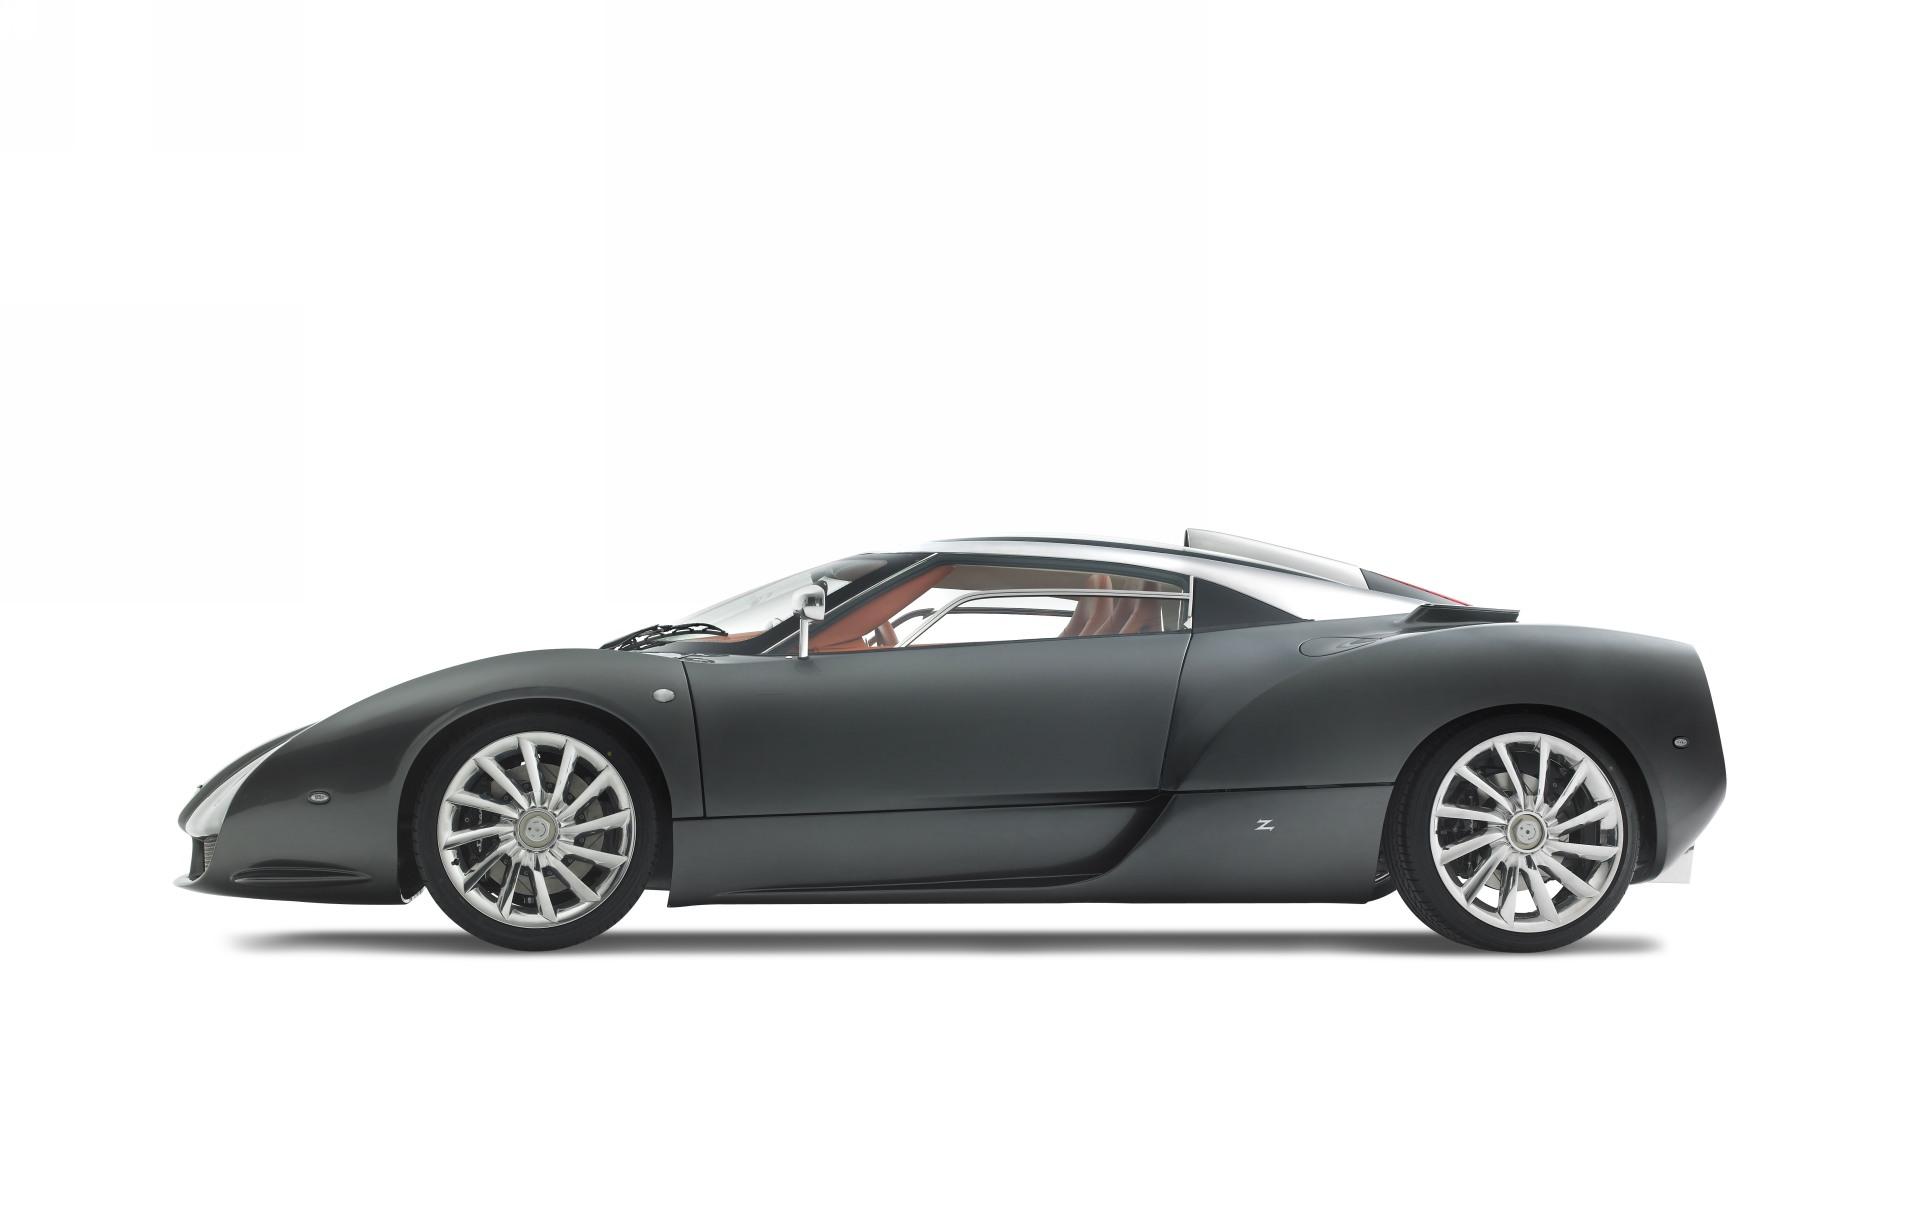 Amazing Spyker C12 Zagato Pictures & Backgrounds